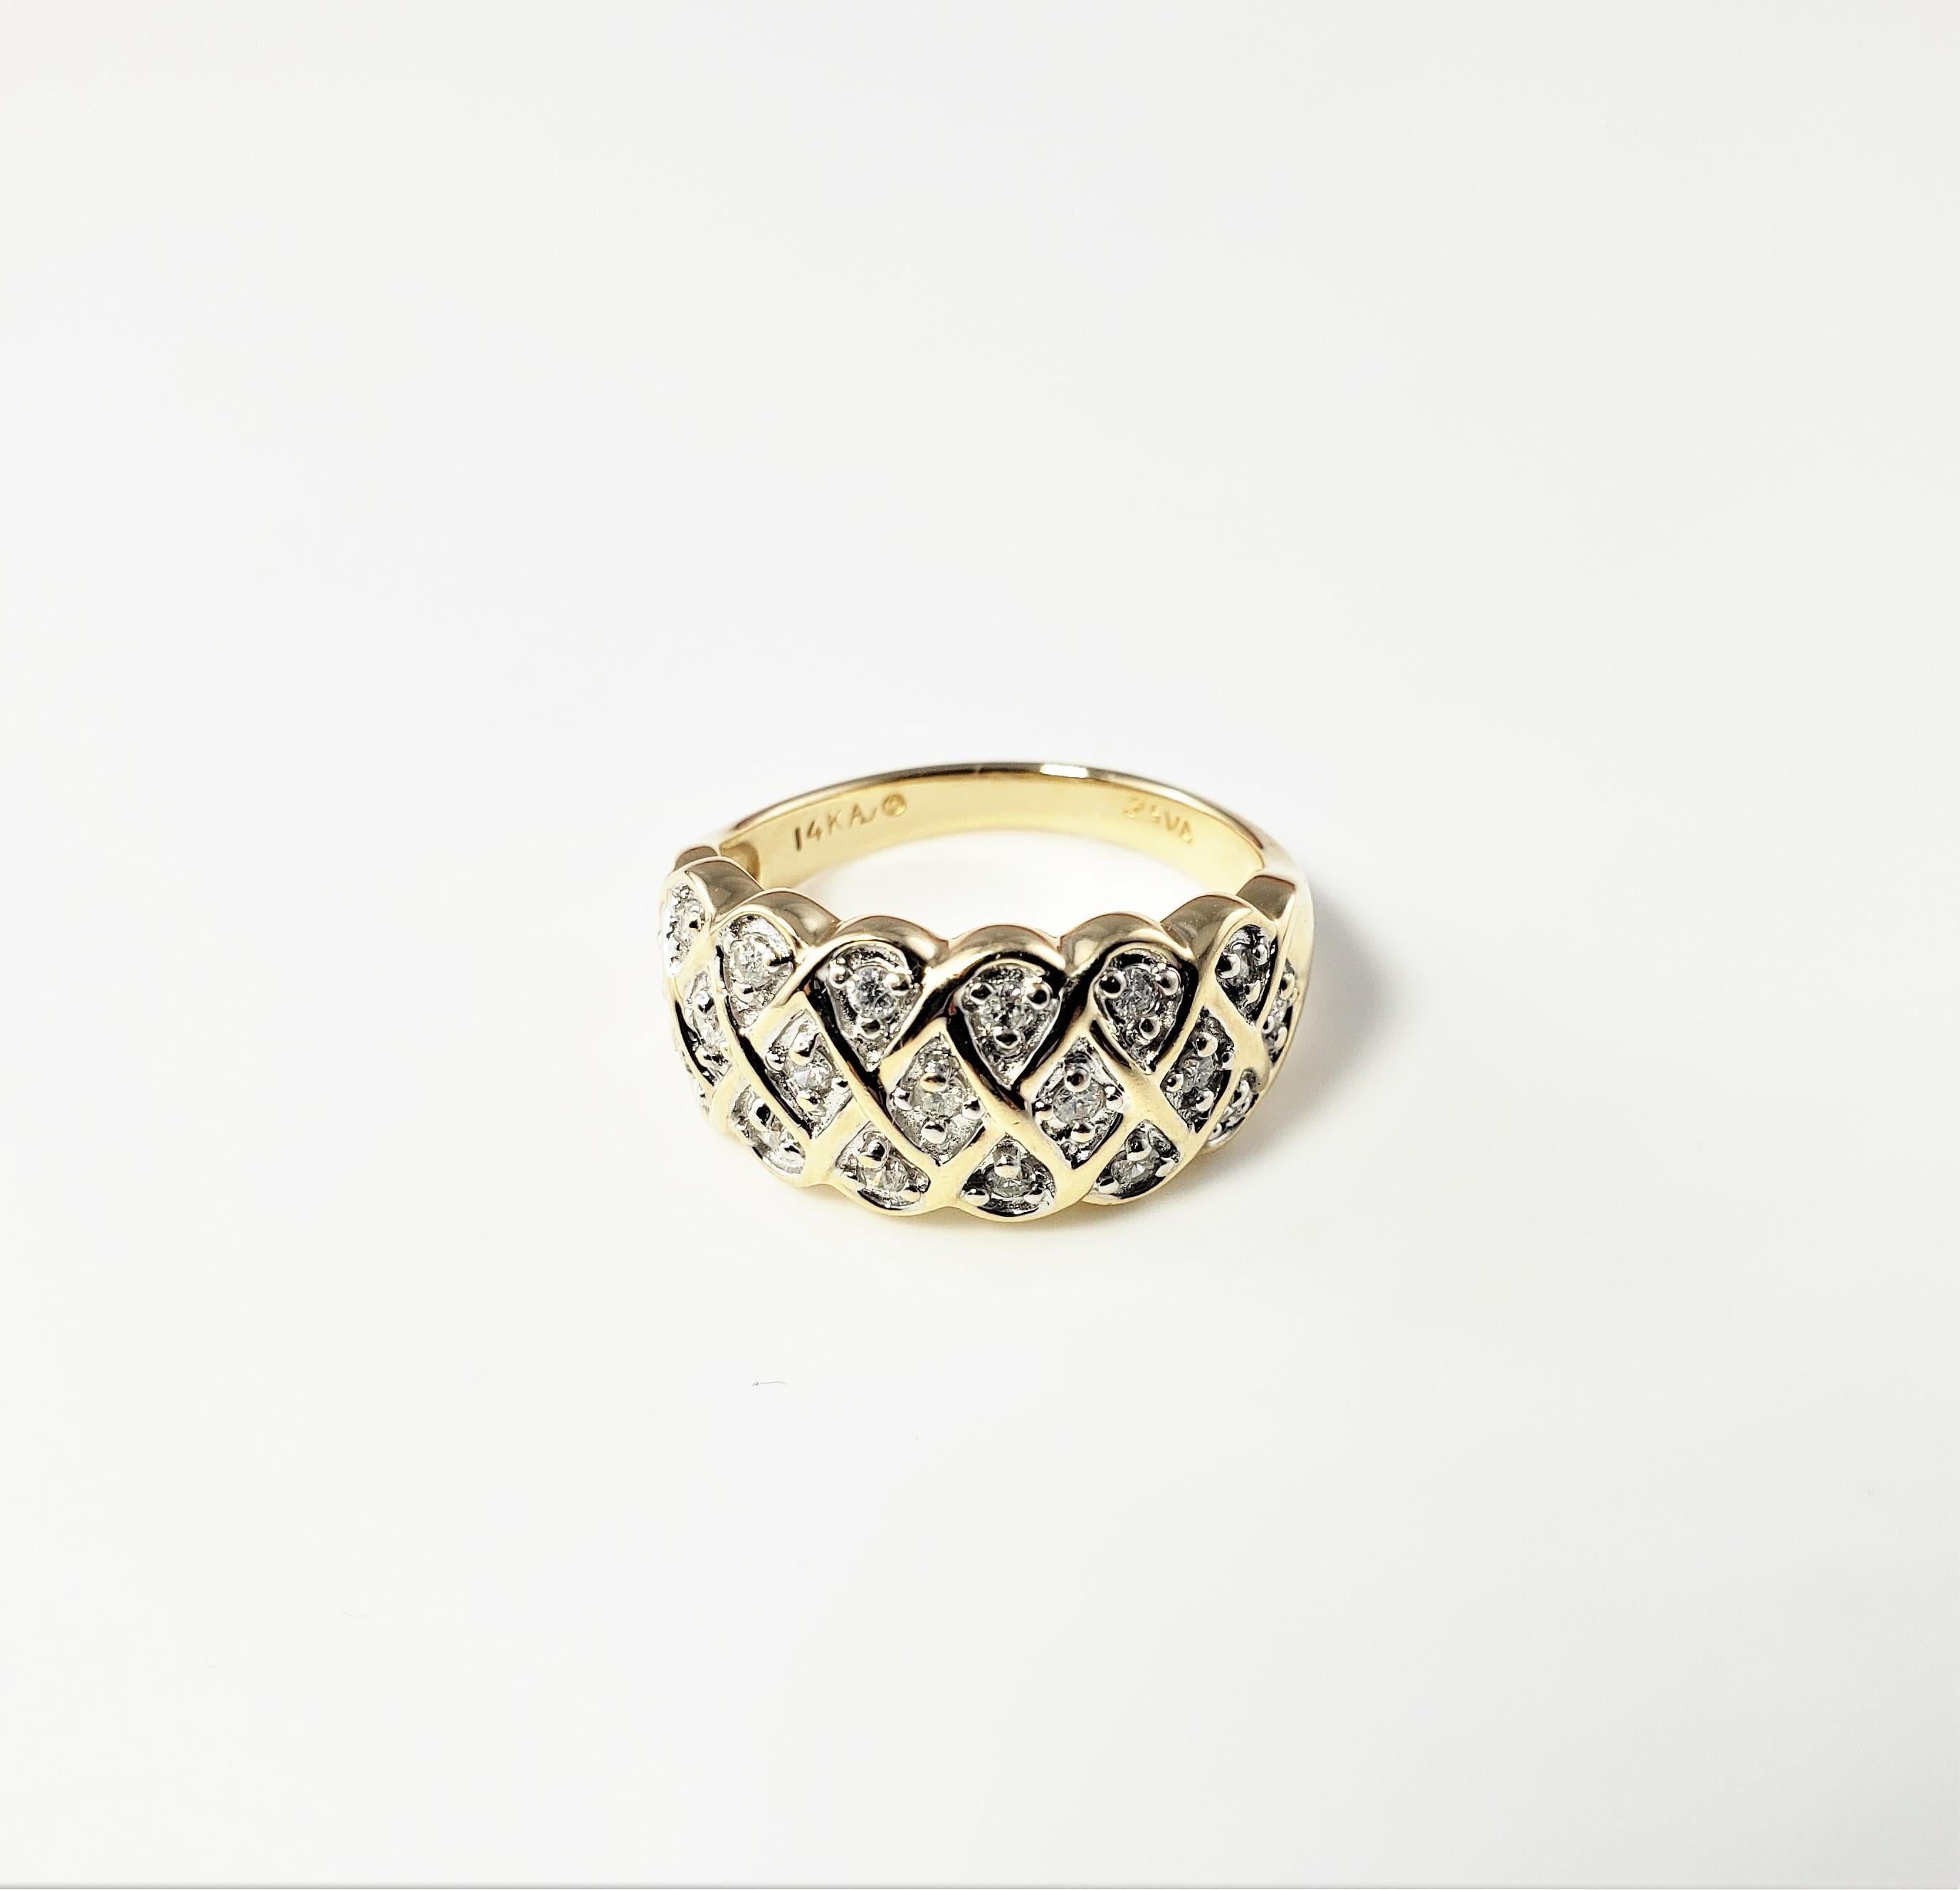 Vintage 14 Karat Yellow Gold and Diamond Ring Size 6.5-

This stunning ring features 19 round brilliant cut diamonds set in beautifully detailed 14K yellow gold.  Width:  10 mm.  Shank:  3 mm.

Approximate total diamond weight:  .19 ct.

Diamond